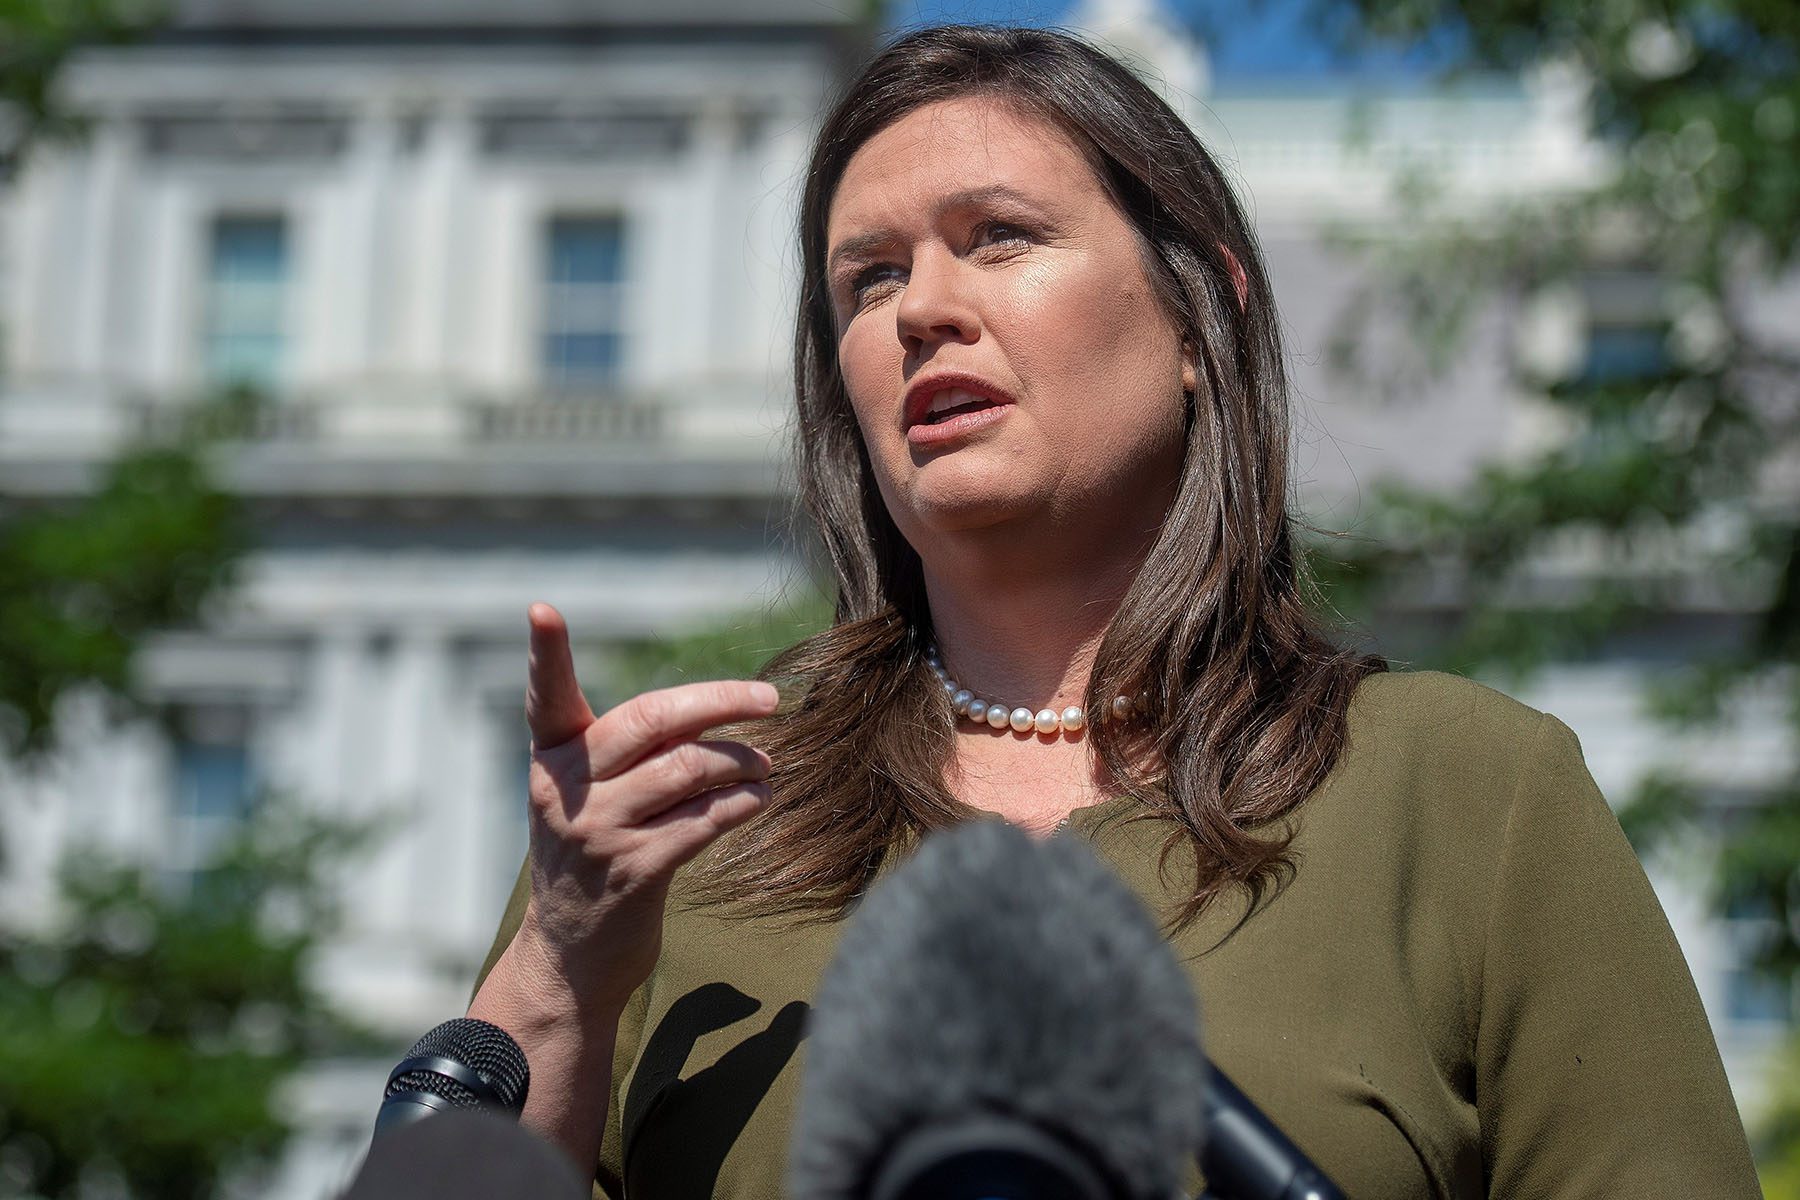 Sarah Huckabee Sanders speaks during a press conference at the White House